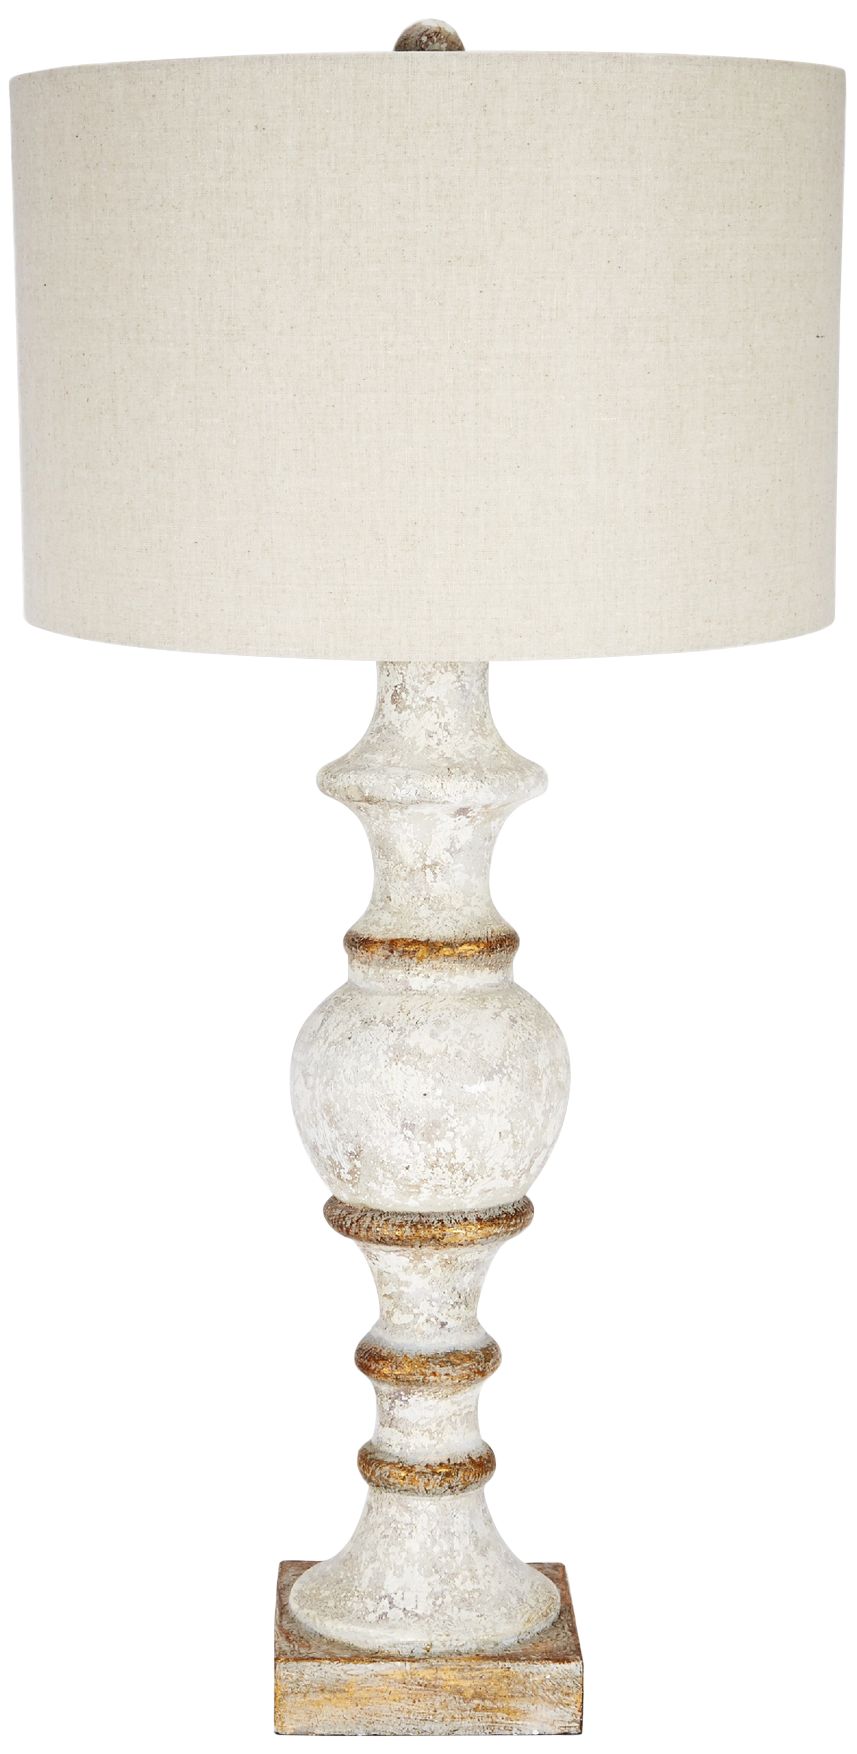 Gold Trim Spindle Table Lamp - #75M05 